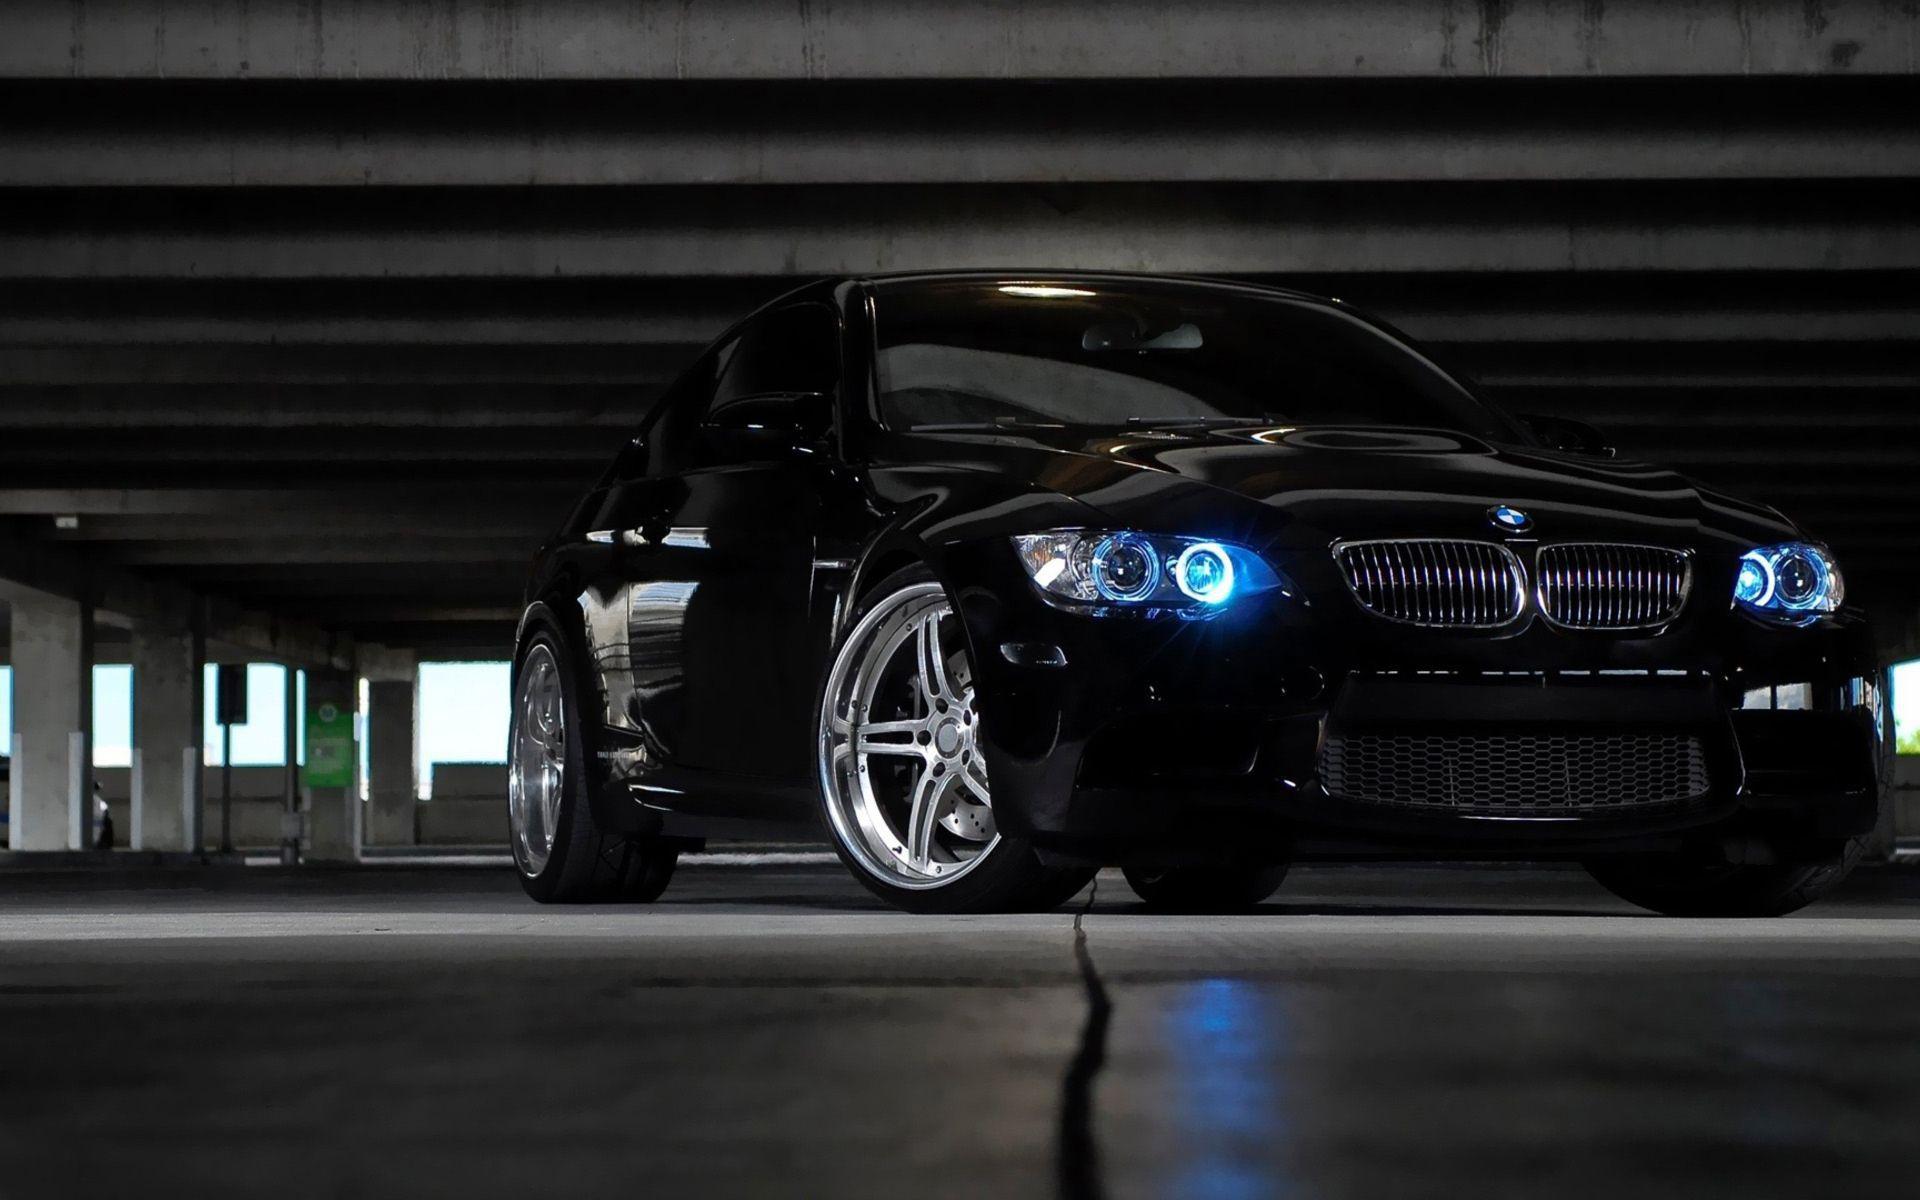 Wallpaper HD Bmw Cars High Resolution Photo Car Of Mobile